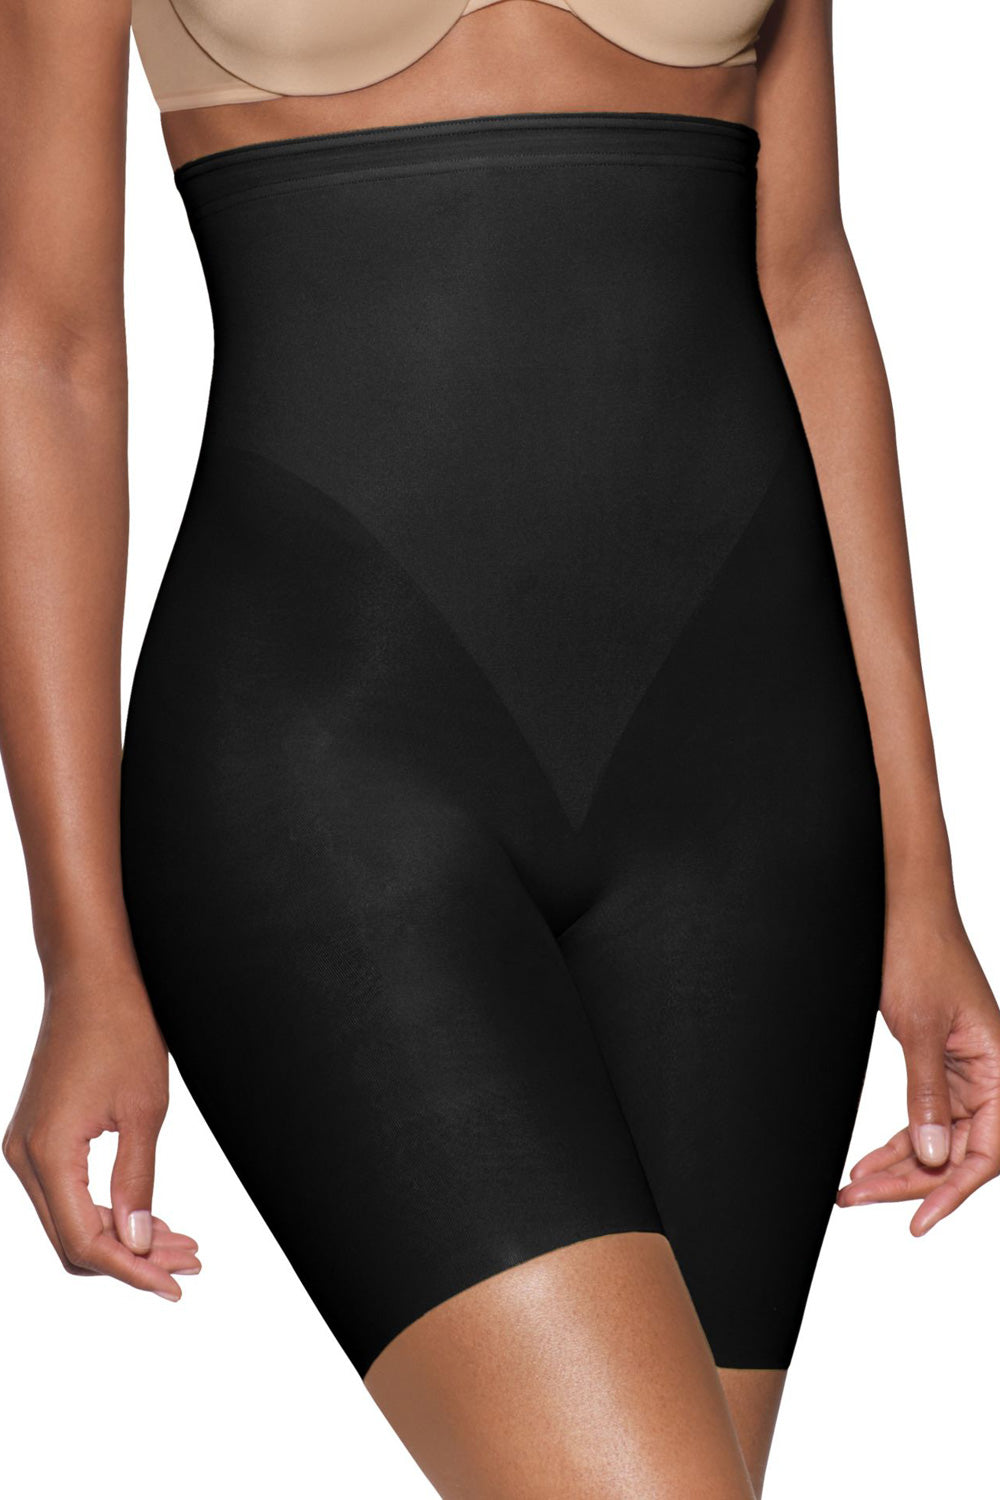 B203 - Bali Shapewear, Extra Firm Waist Smoother Invisible Look Seamless